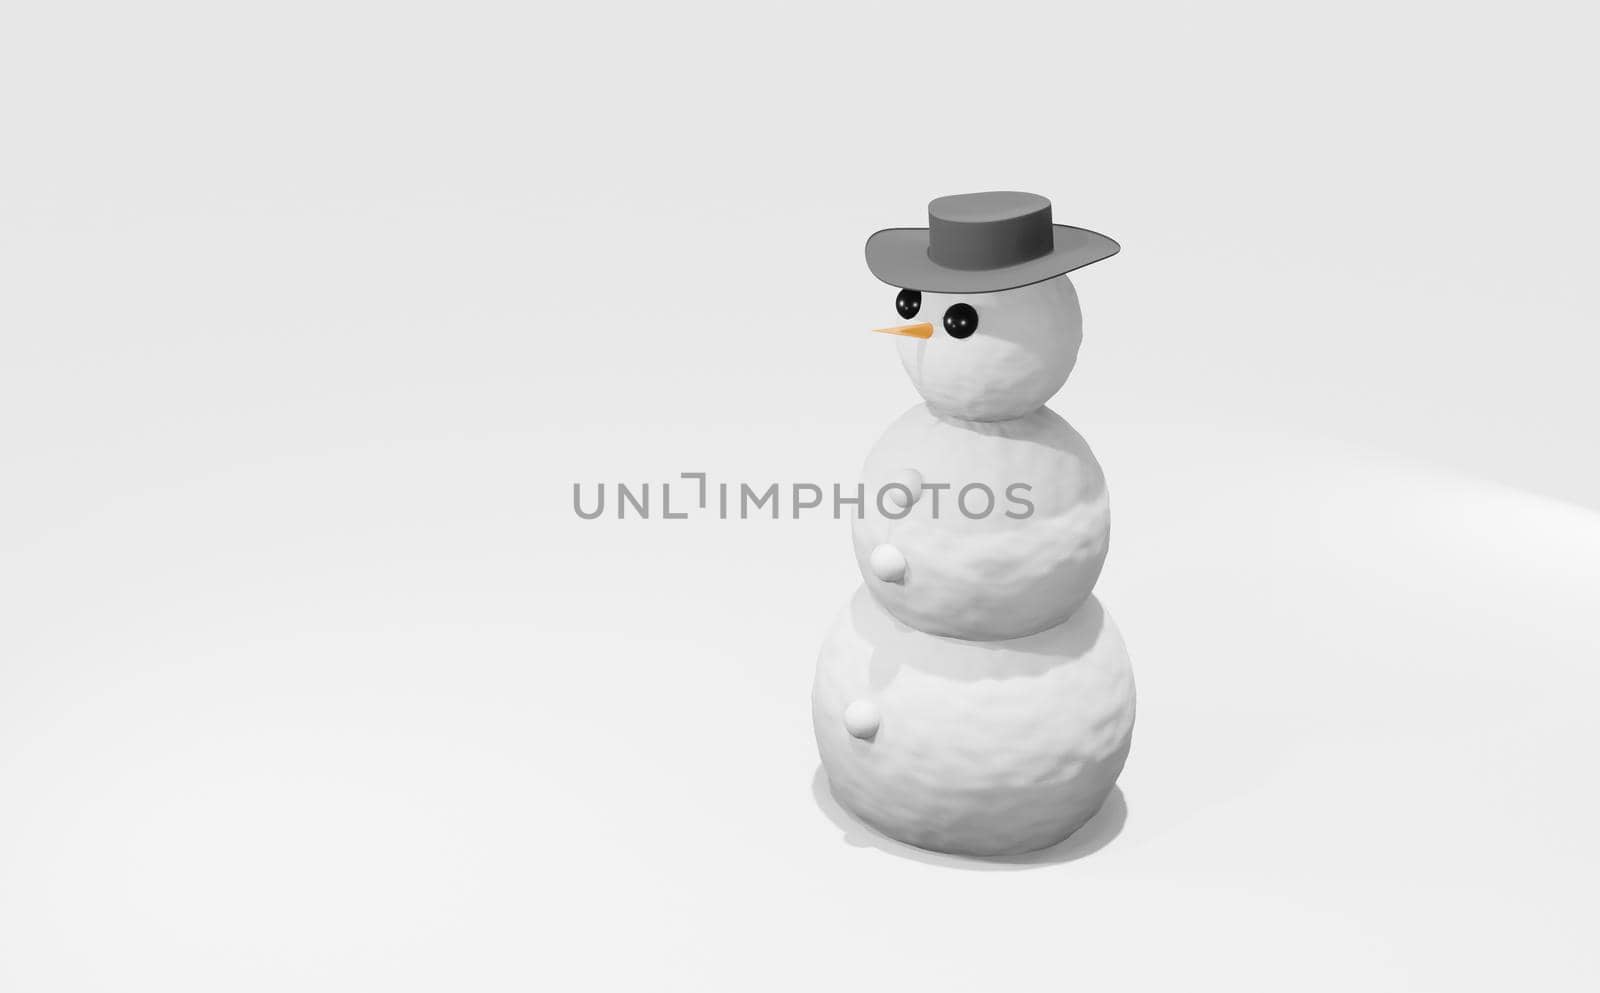 3d render character, cheerful white snowman cartoon ilustration isolated on white background.